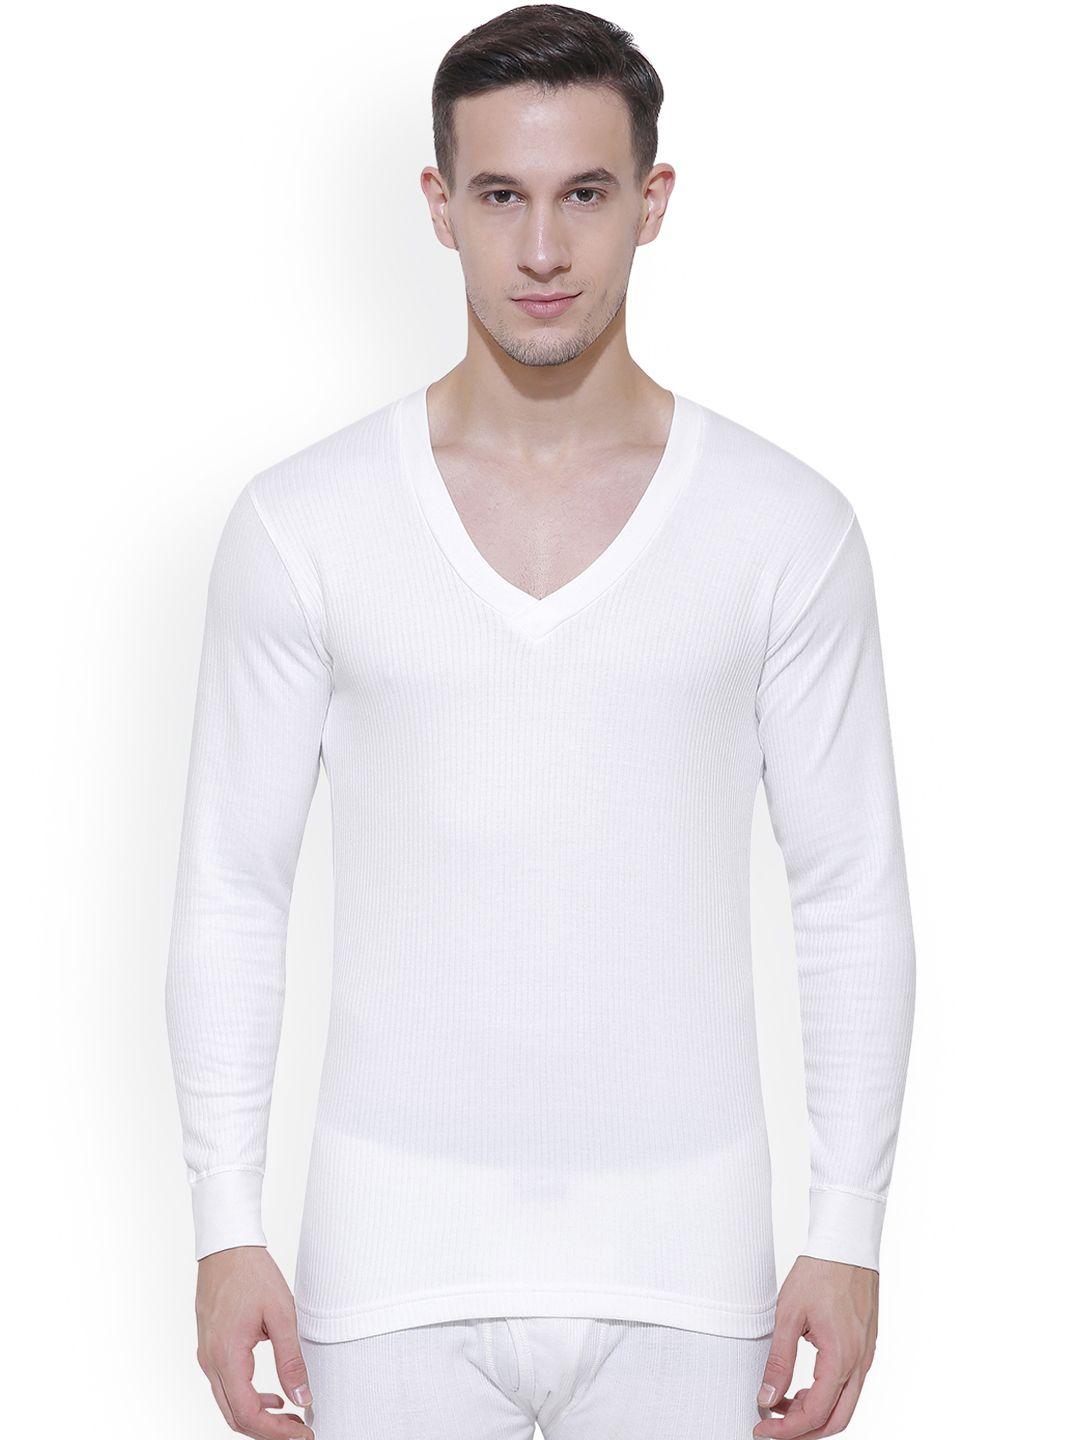 bodycare insider men off white solid thermal top b104_80